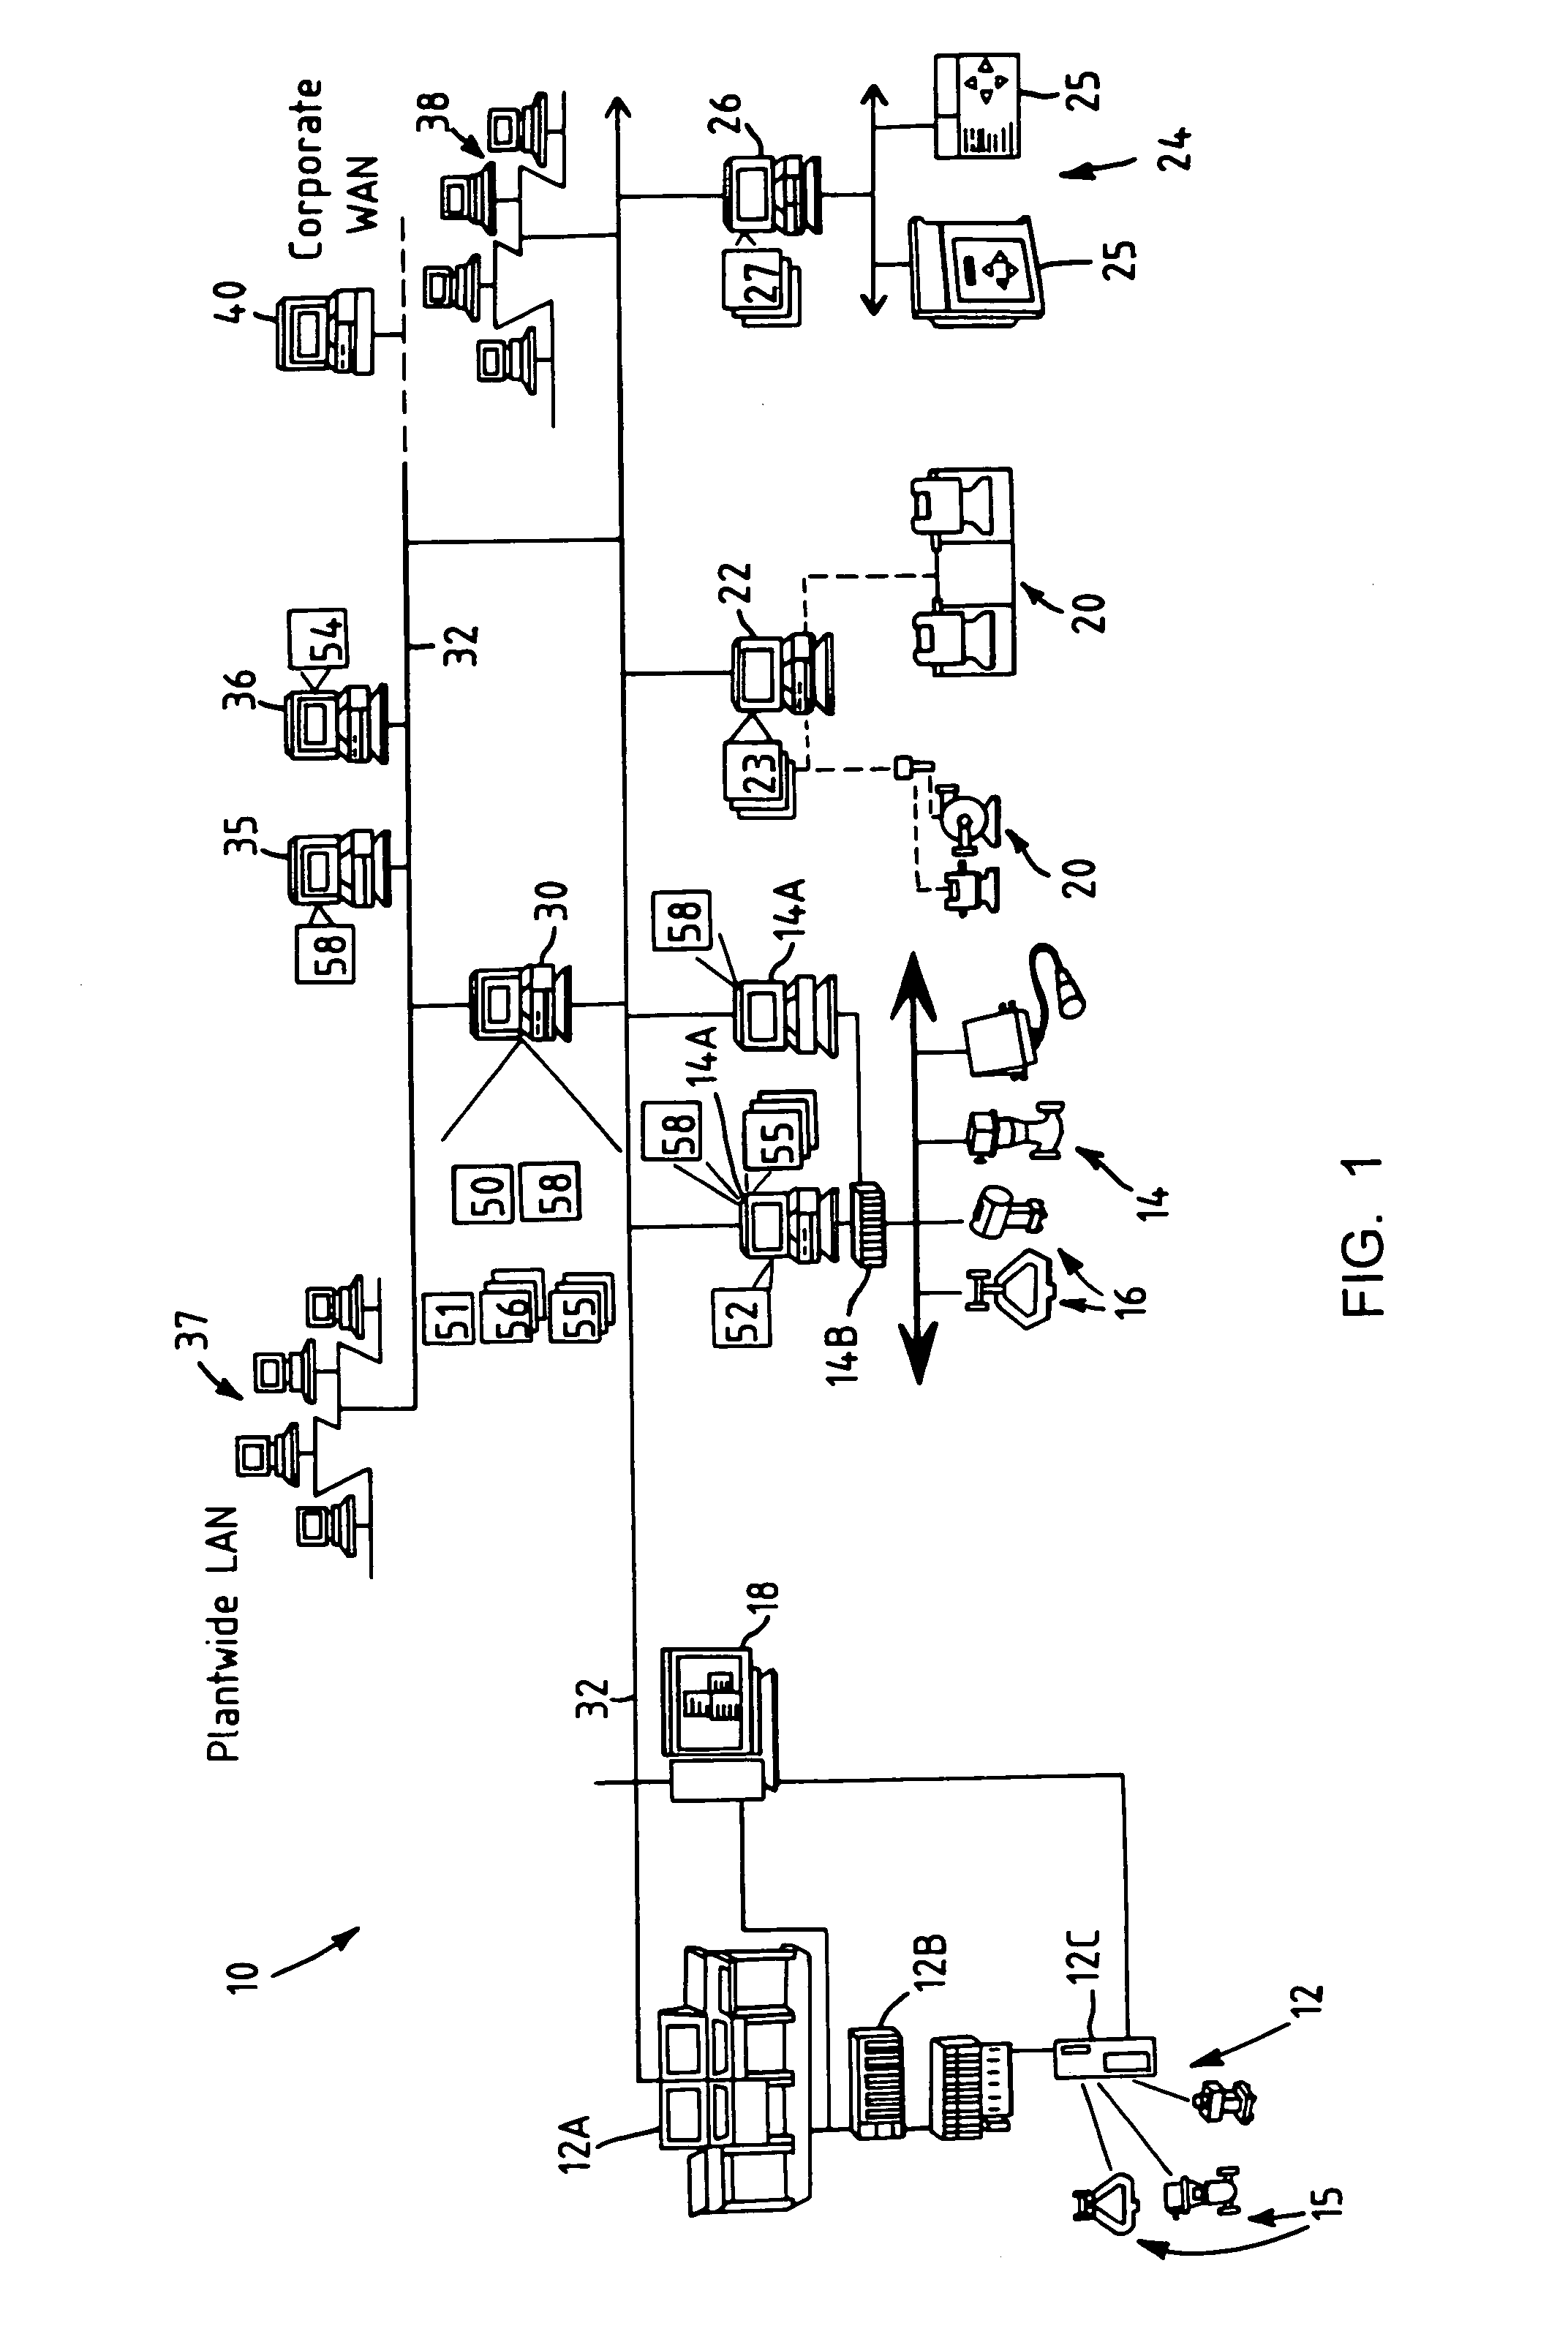 Method and apparatus for performing a function in a plant using process performance monitoring with process equipment monitoring and control